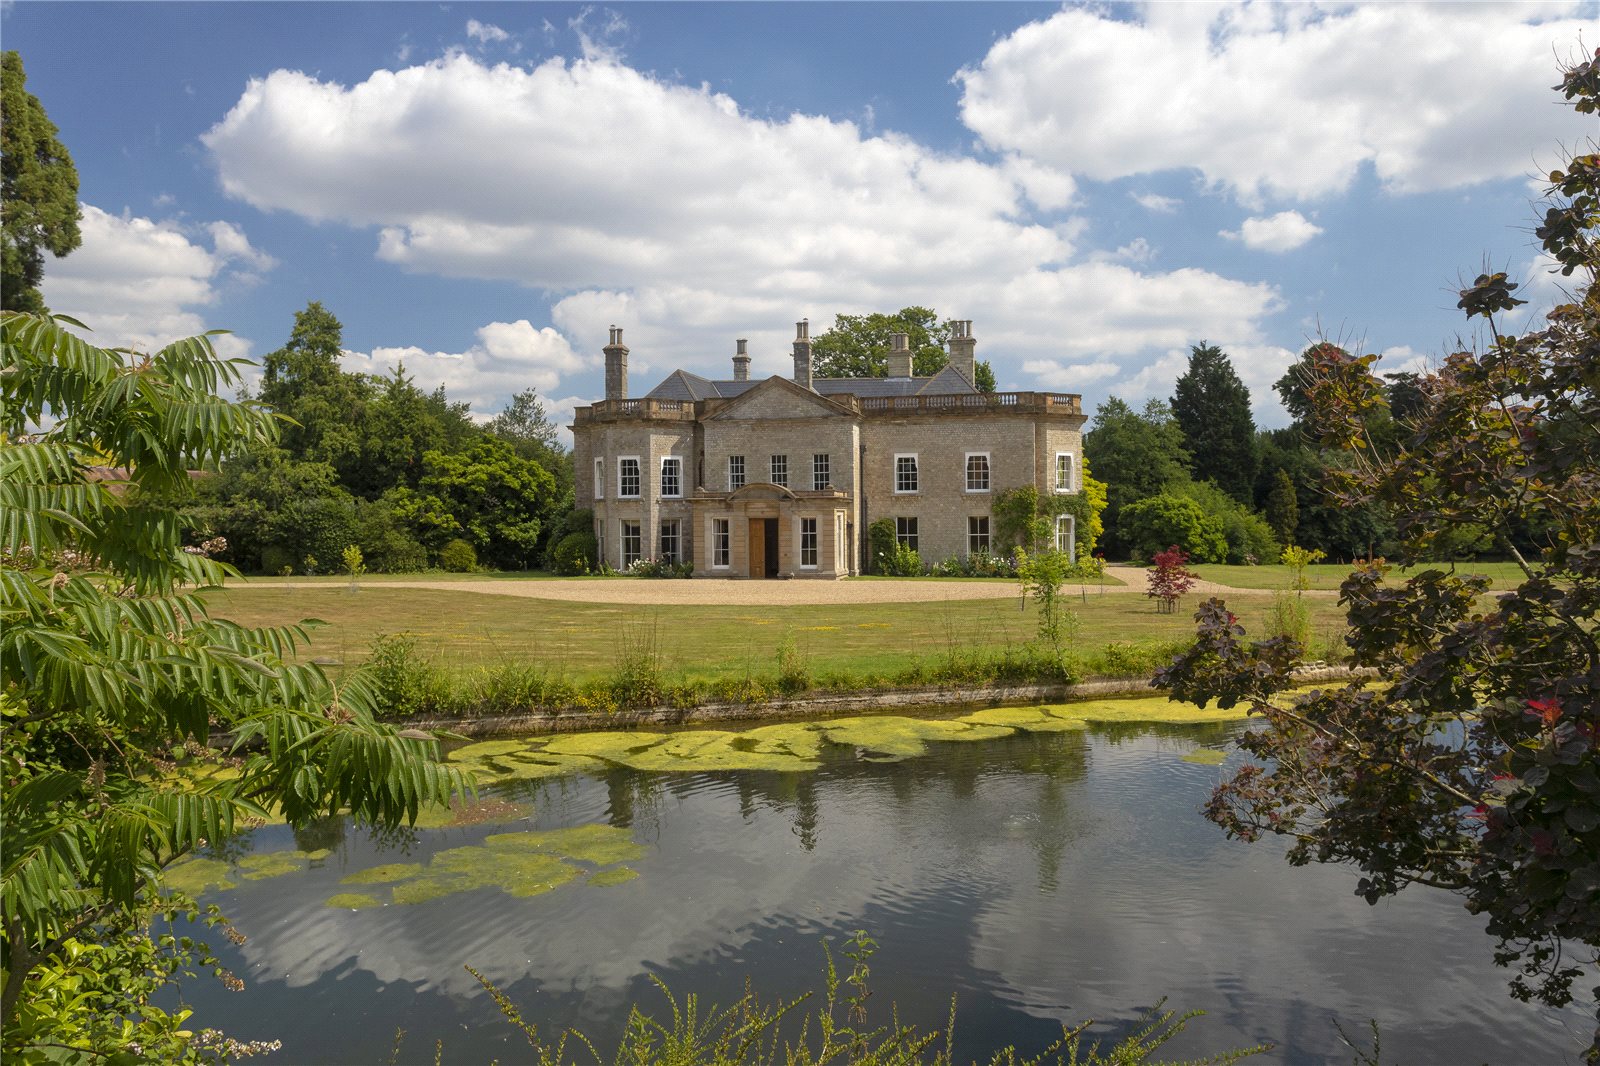 Six Mesmerising Country Houses For Sale, As Seen In Country Life